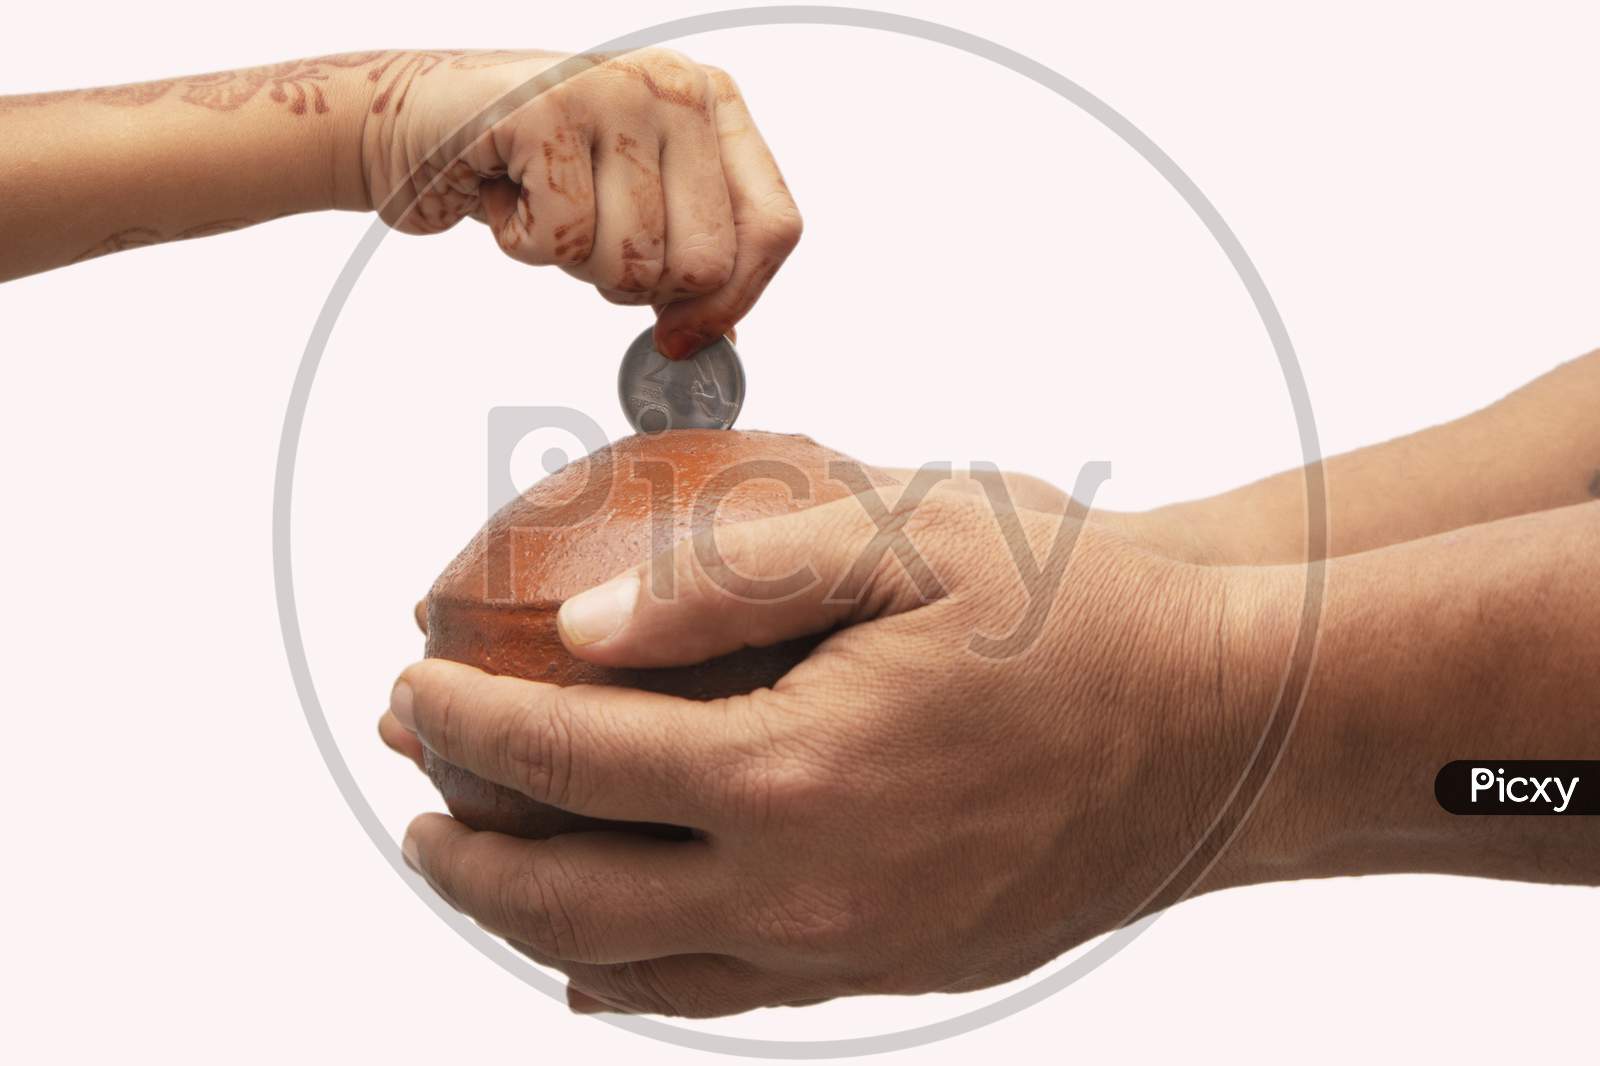 Hands Holding Indian Penny Bank Made With Mud Clay And Child Hand Adding Coin Into The Earthen Pot Or Terracotta Piggy Bank On Isolated Background - Concept Showing Of Saving, Investment Or Donating.